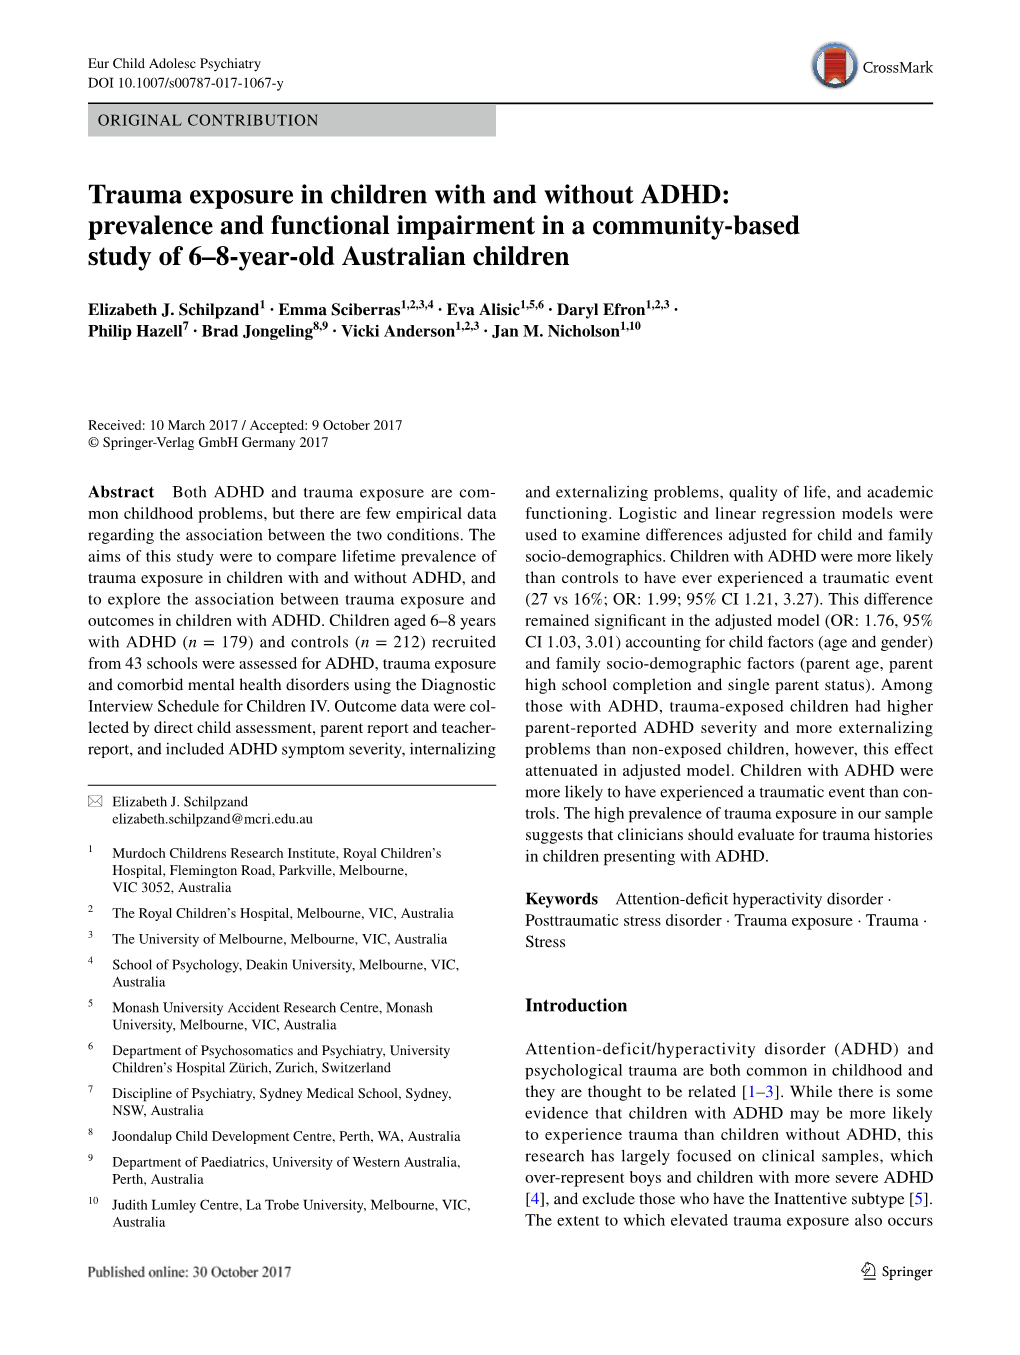 Trauma Exposure in Children with and Without ADHD: Prevalence and Functional Impairment in a Community-Based Study of 6–8-Year